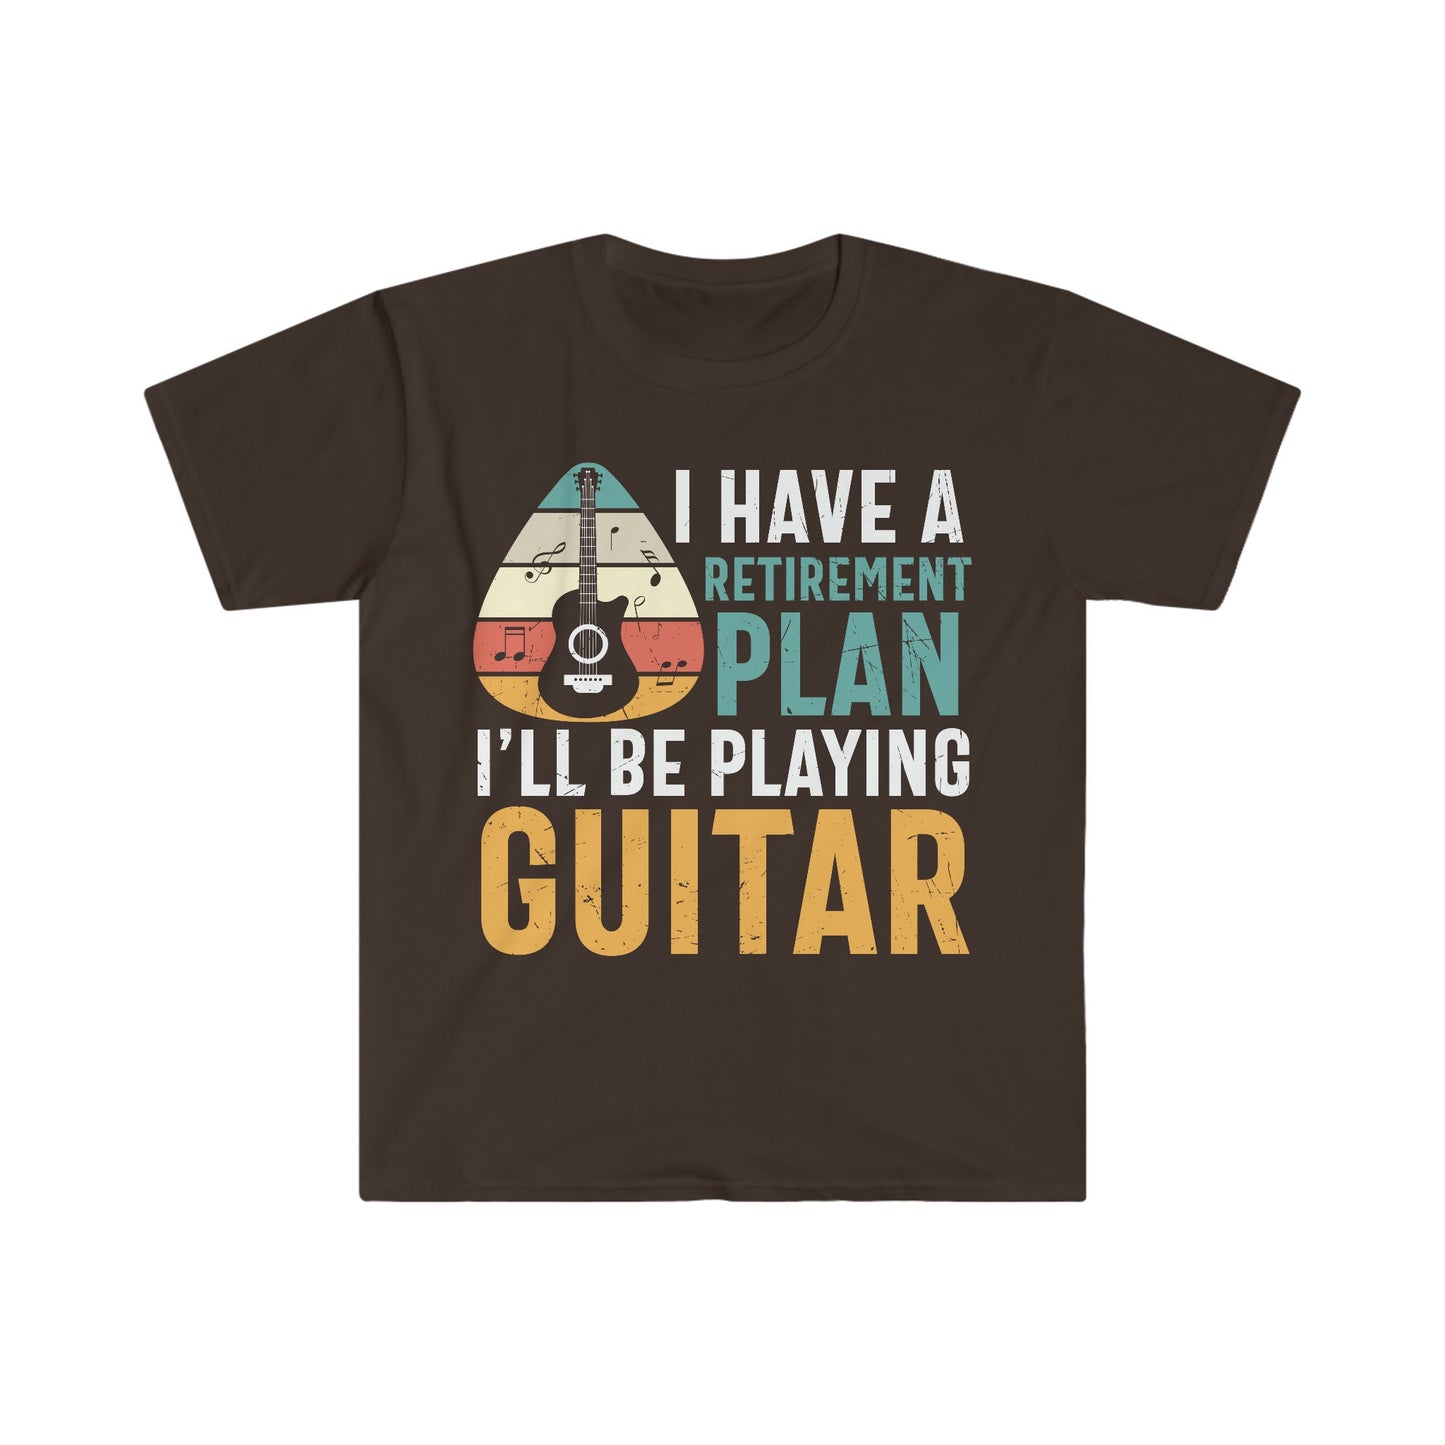 I Have a Retirement Plan, I'll Be Playing Guitar - Unisex Softstyle T-Shirt